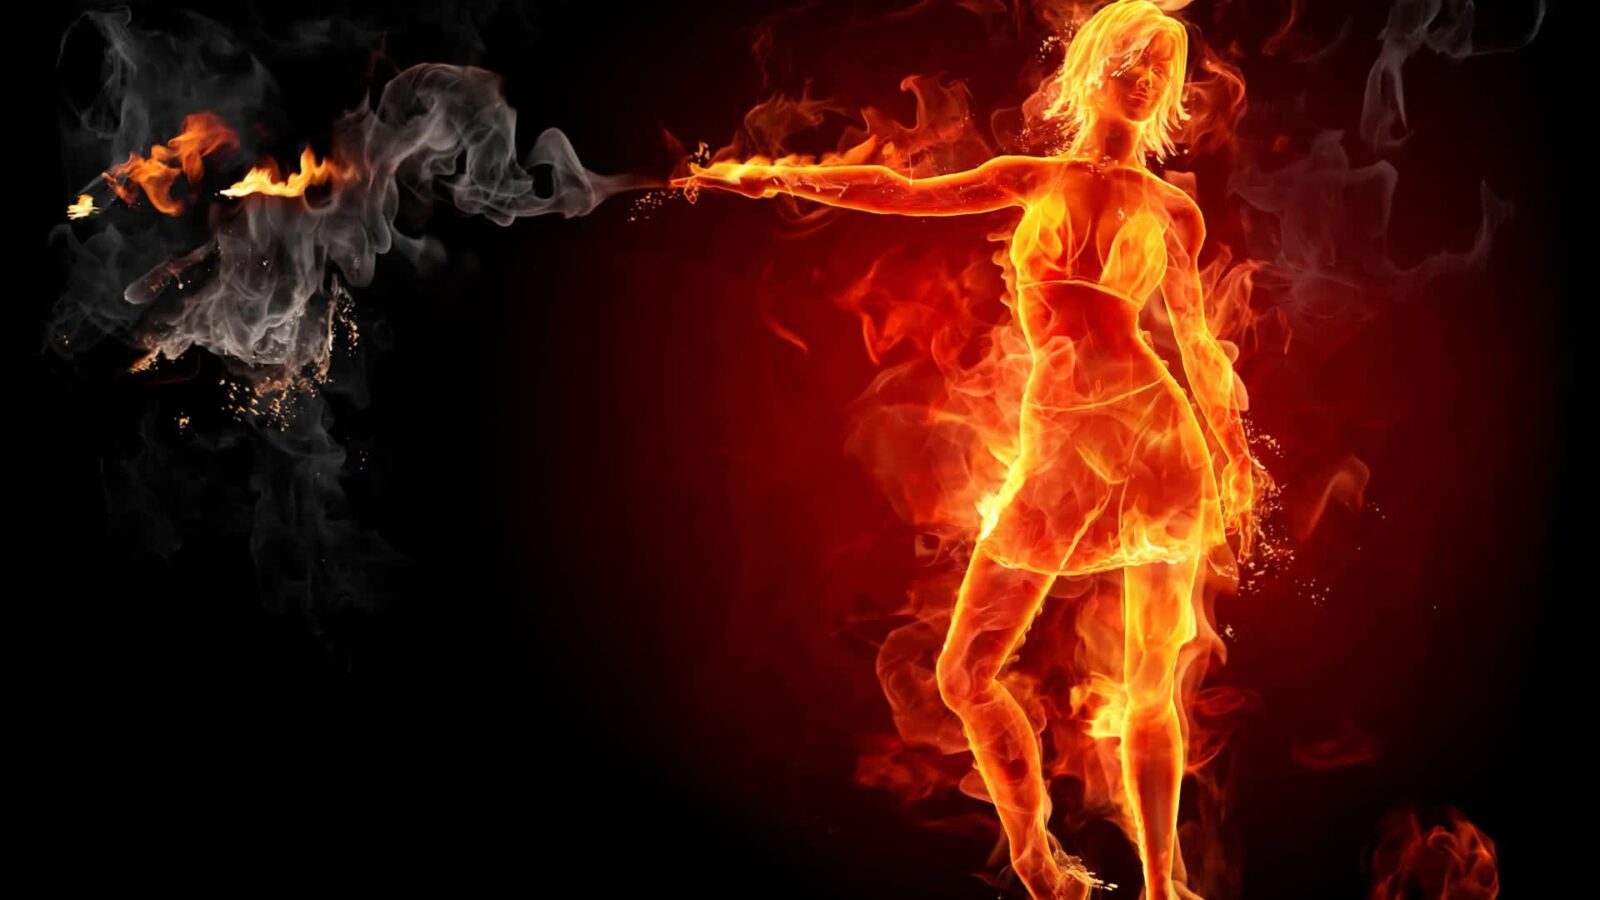 LiveWallpapers4Free.com | Fire Girl - Free Live Wallpaper